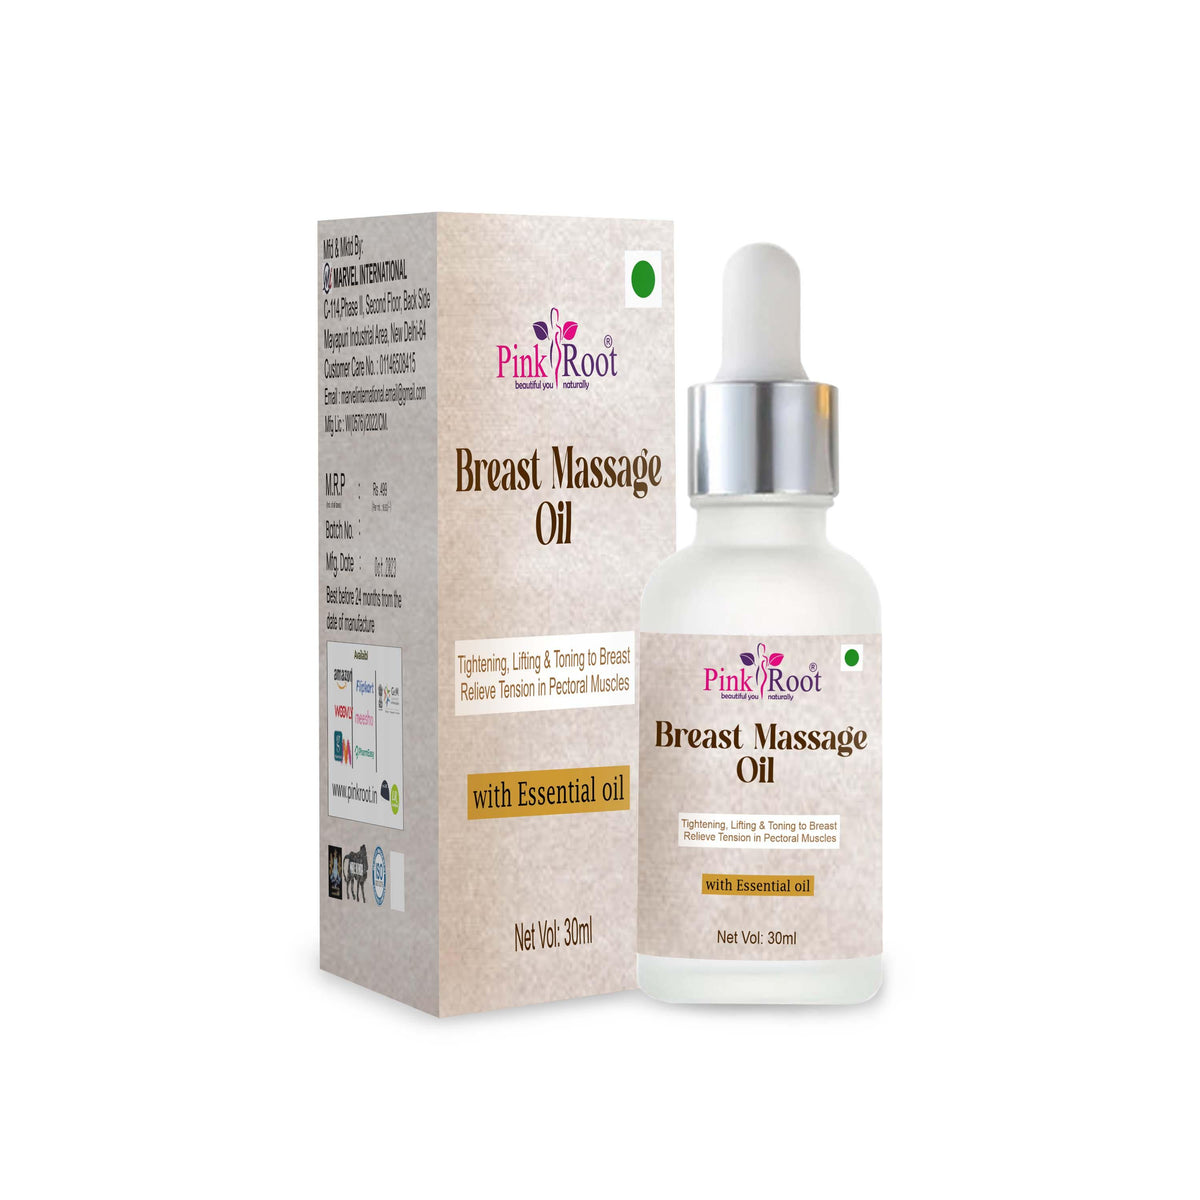 Pink Root Breast Toning & Firming Oil 30ml, Helps firm and tone tissue, prevent sagging and shape-up naturally - Pink Root